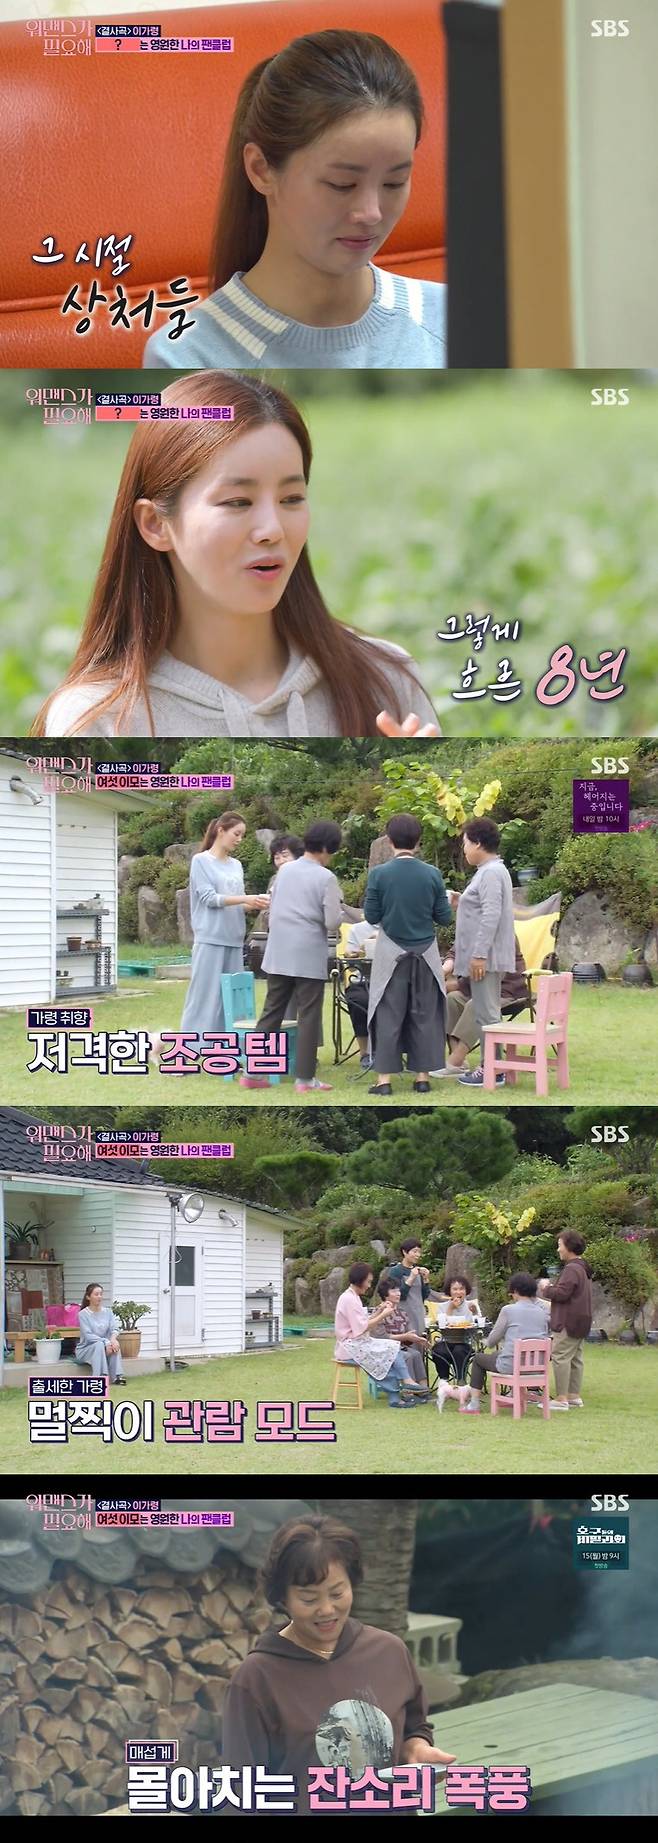 One Mans War Lee Ga-ryung tears in long hiatus after getting off DramaActor Lee Ga-ryungs daily life was first revealed in the SBS entertainment program One Mans War is needed broadcast on the 11th.Lee Ga-ryung was living in the Jecheon Outdoor House.This is a place where my grandfather and grandmother often visit as a place where their families heal after leaving. Lee Ga-ryung said, Drama happened while working as a model.I came out as Friend, and in 2014, I was ready for Drama, but I was not able to work for a long time because I was not good at it. Lee Ga-ryung, who has been living in obscurity for a long time since then, said, I have a good opportunity in seven to eight years and have done this work.So, marriage writer divorce composition became my masterpiece. Lee Ga-ryung opened his eyes and drank coffee in the front yard of his house, followed by Lee Ga-ryung, who went to the garden of a big house and picked up various vegetables.Lee Ga-ryung skillfully cooked with vegetables he took himself, giving a glimpse of the cooking coriander aspect; Lee Ga-ryungs dining spot was also a yard.Lee Ga-ryung laid a cushion on the floor and ate a rough meal with nature as a background.Lee Ga-ryung came while taking a nap, her mother came to her at night, worried about her daughter who was alone, and ran for a month, Lee Ga-ryung revealed that she was living like a mother and Friend.My mother was saddened to see Lee Ga-ryung in the song s song.Because of the memory of getting off Midway suddenly dying in MBC Indomitable Cha which appeared as a starring actor.Lee Ga-ryungs mother said, When I got off, my heart was sore, but I wanted to do a god who killed the child again because I was a god who was a phyto god. Lee Ga-ryung showed tears as if he were crying.Lee Ga-ryung said, After I passed, I looked back and I saw that I took a god, not a work a year, but eight years ago. Its been eight years since I took eight gods.My mother said that Lee Ga-ryungs Actor was a lot of trouble, I thought I should stop because I was not going to go, but I would be an entertainer.Then I think I did well this time. 